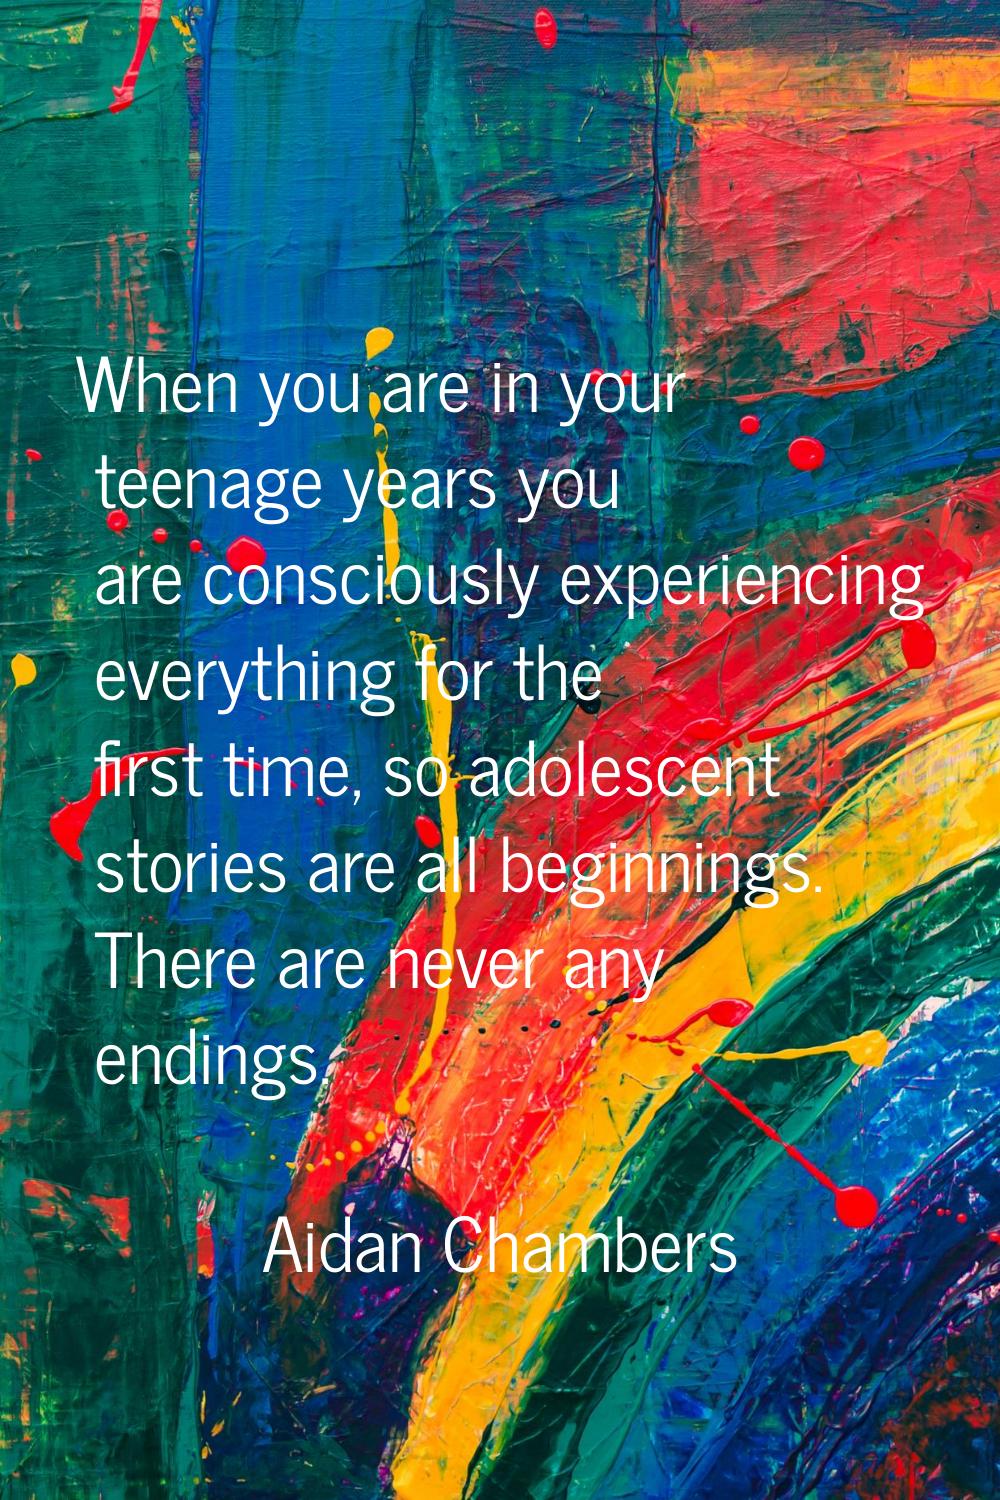 When you are in your teenage years you are consciously experiencing everything for the first time, 